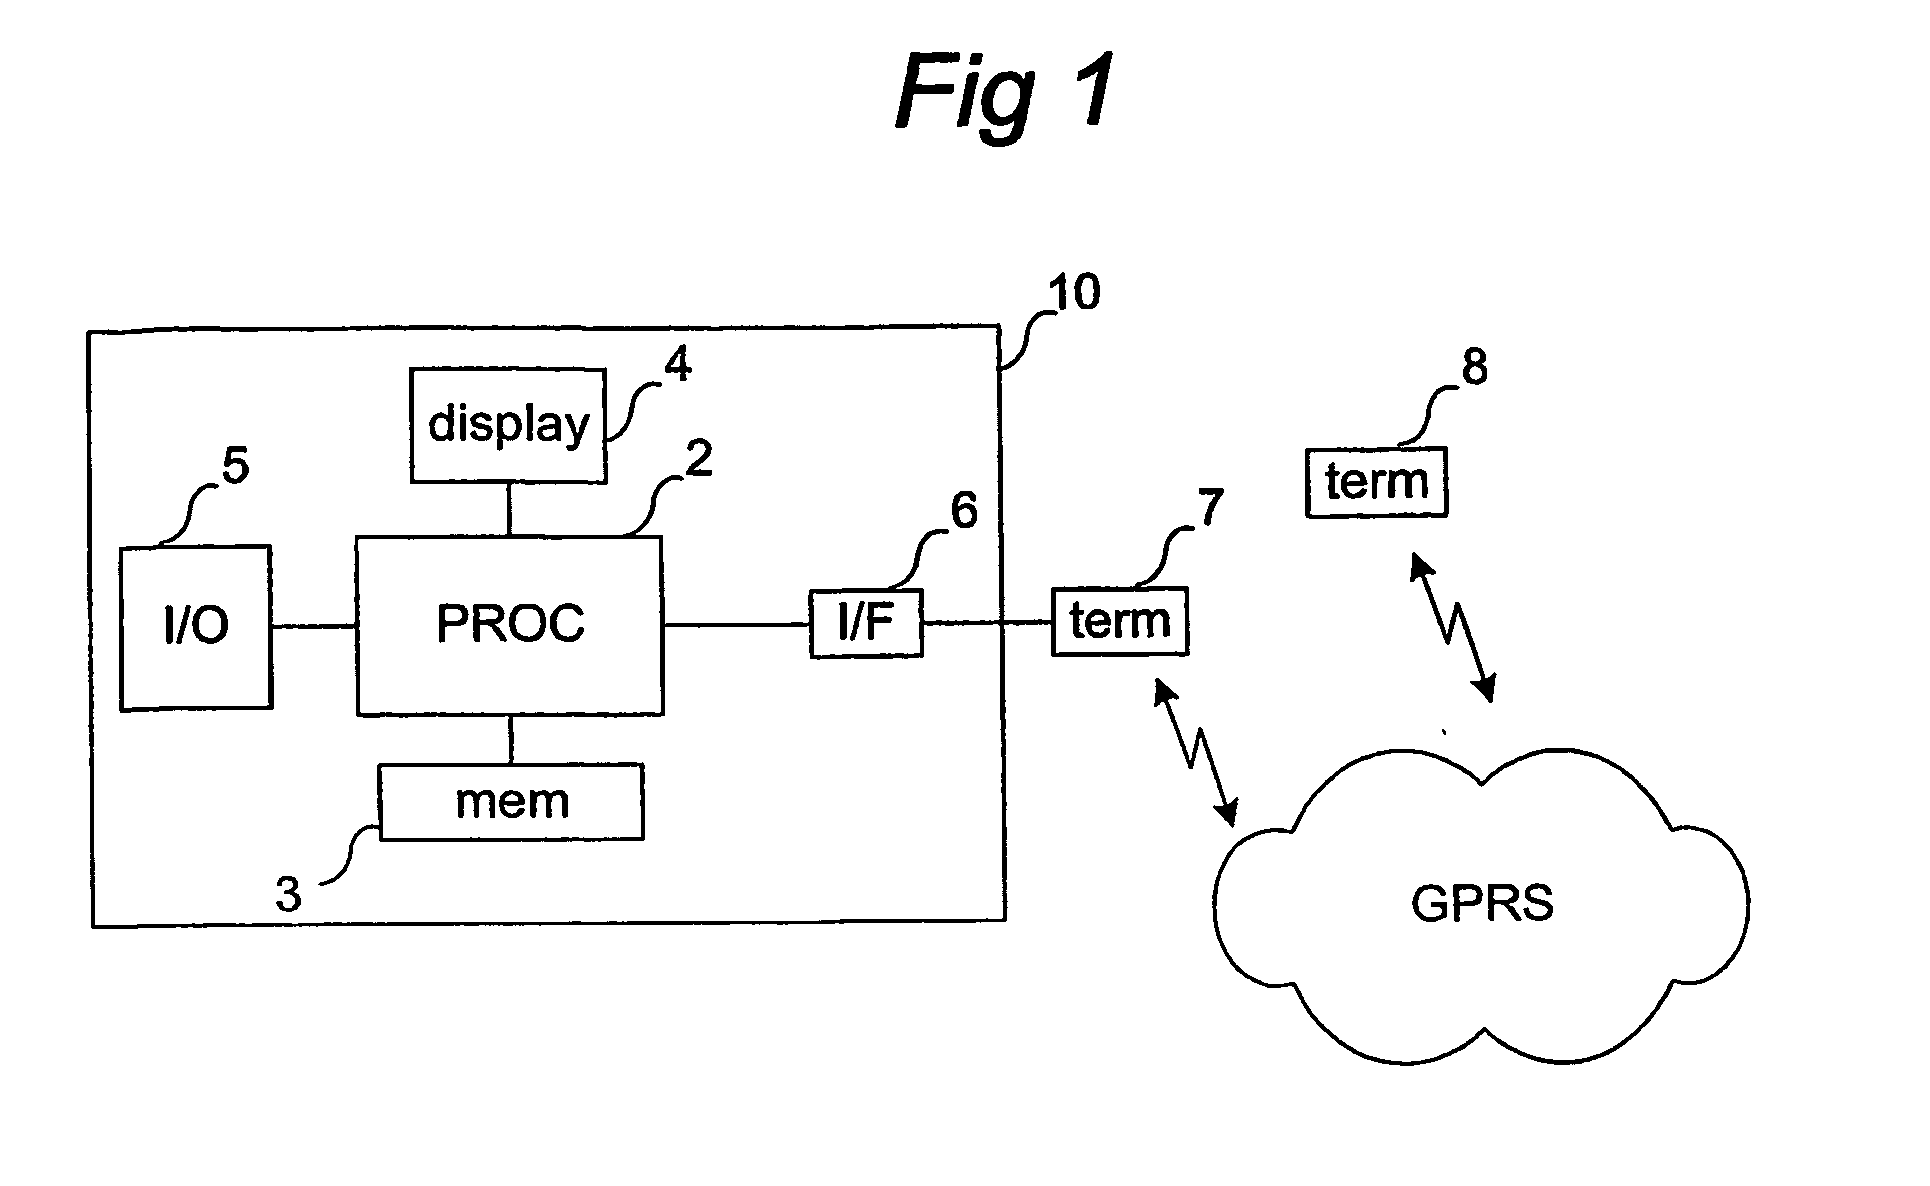 Method and system for analysing data quality measurements in wireless data communication networks